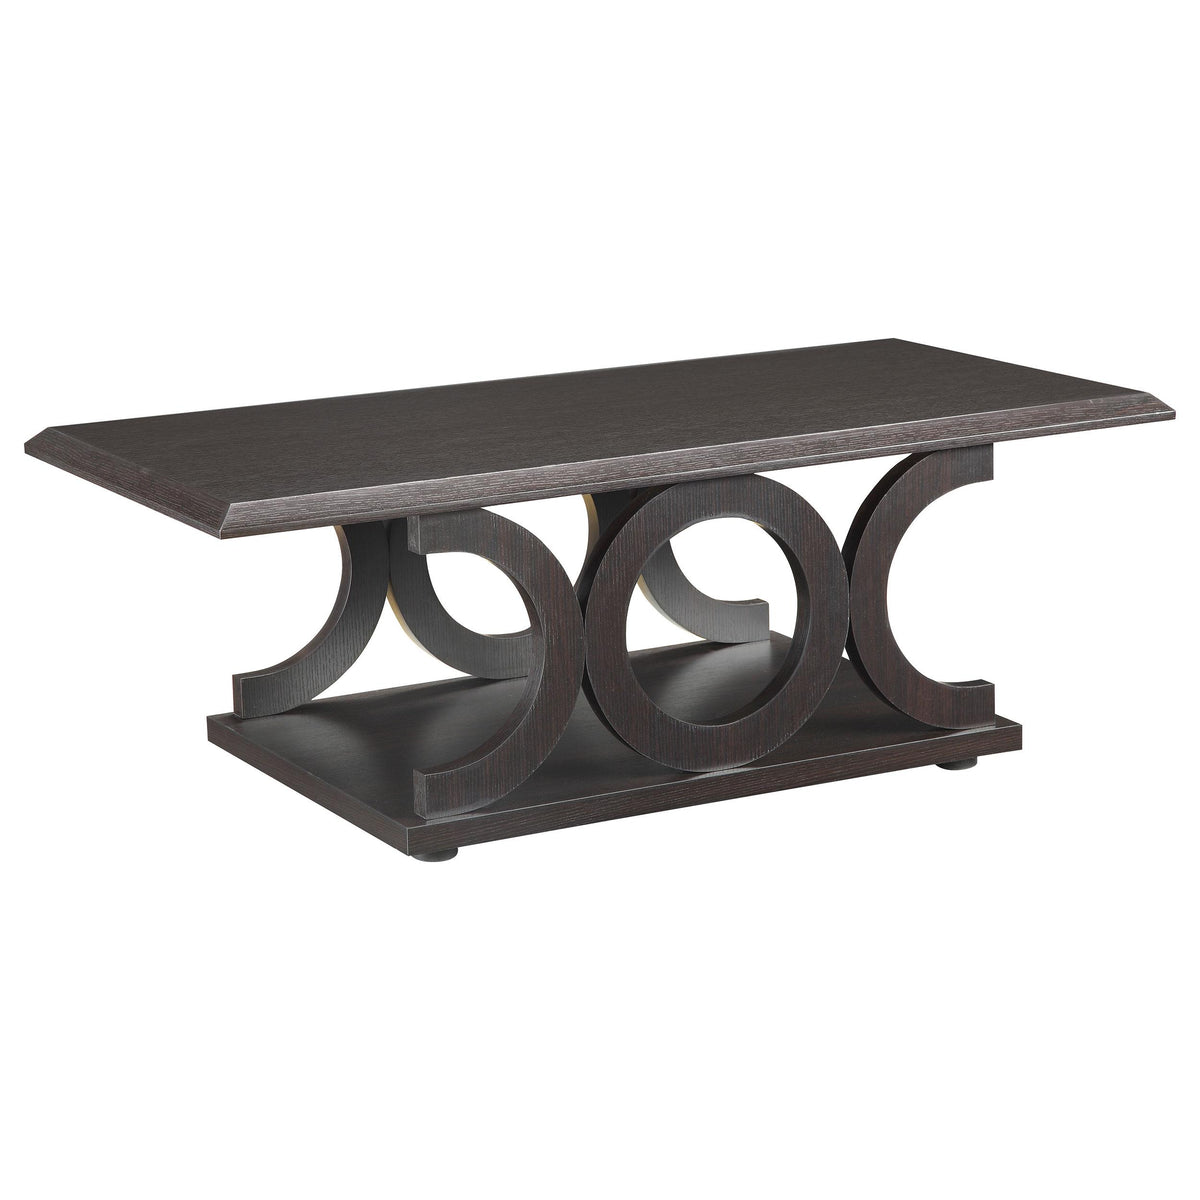 Shelly C-shaped Base Coffee Table Cappuccino Shelly C-shaped Base Coffee Table Cappuccino Half Price Furniture